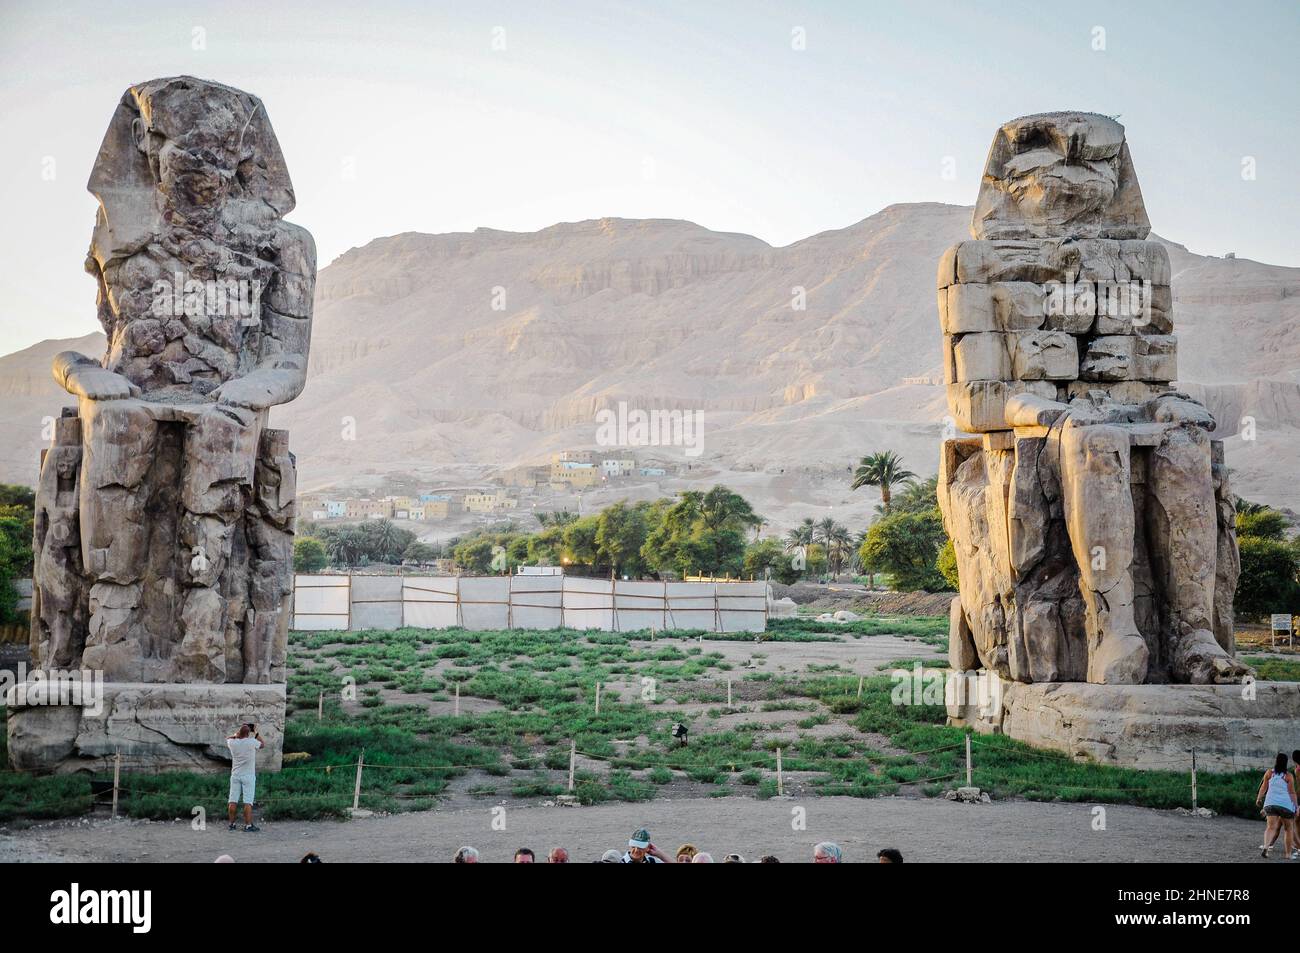 The Colossi of Memnon (also known as el-Colossat or el-Salamat) are two monumental statues representing Amenhotep III (1386-1353 BCE) Stock Photo